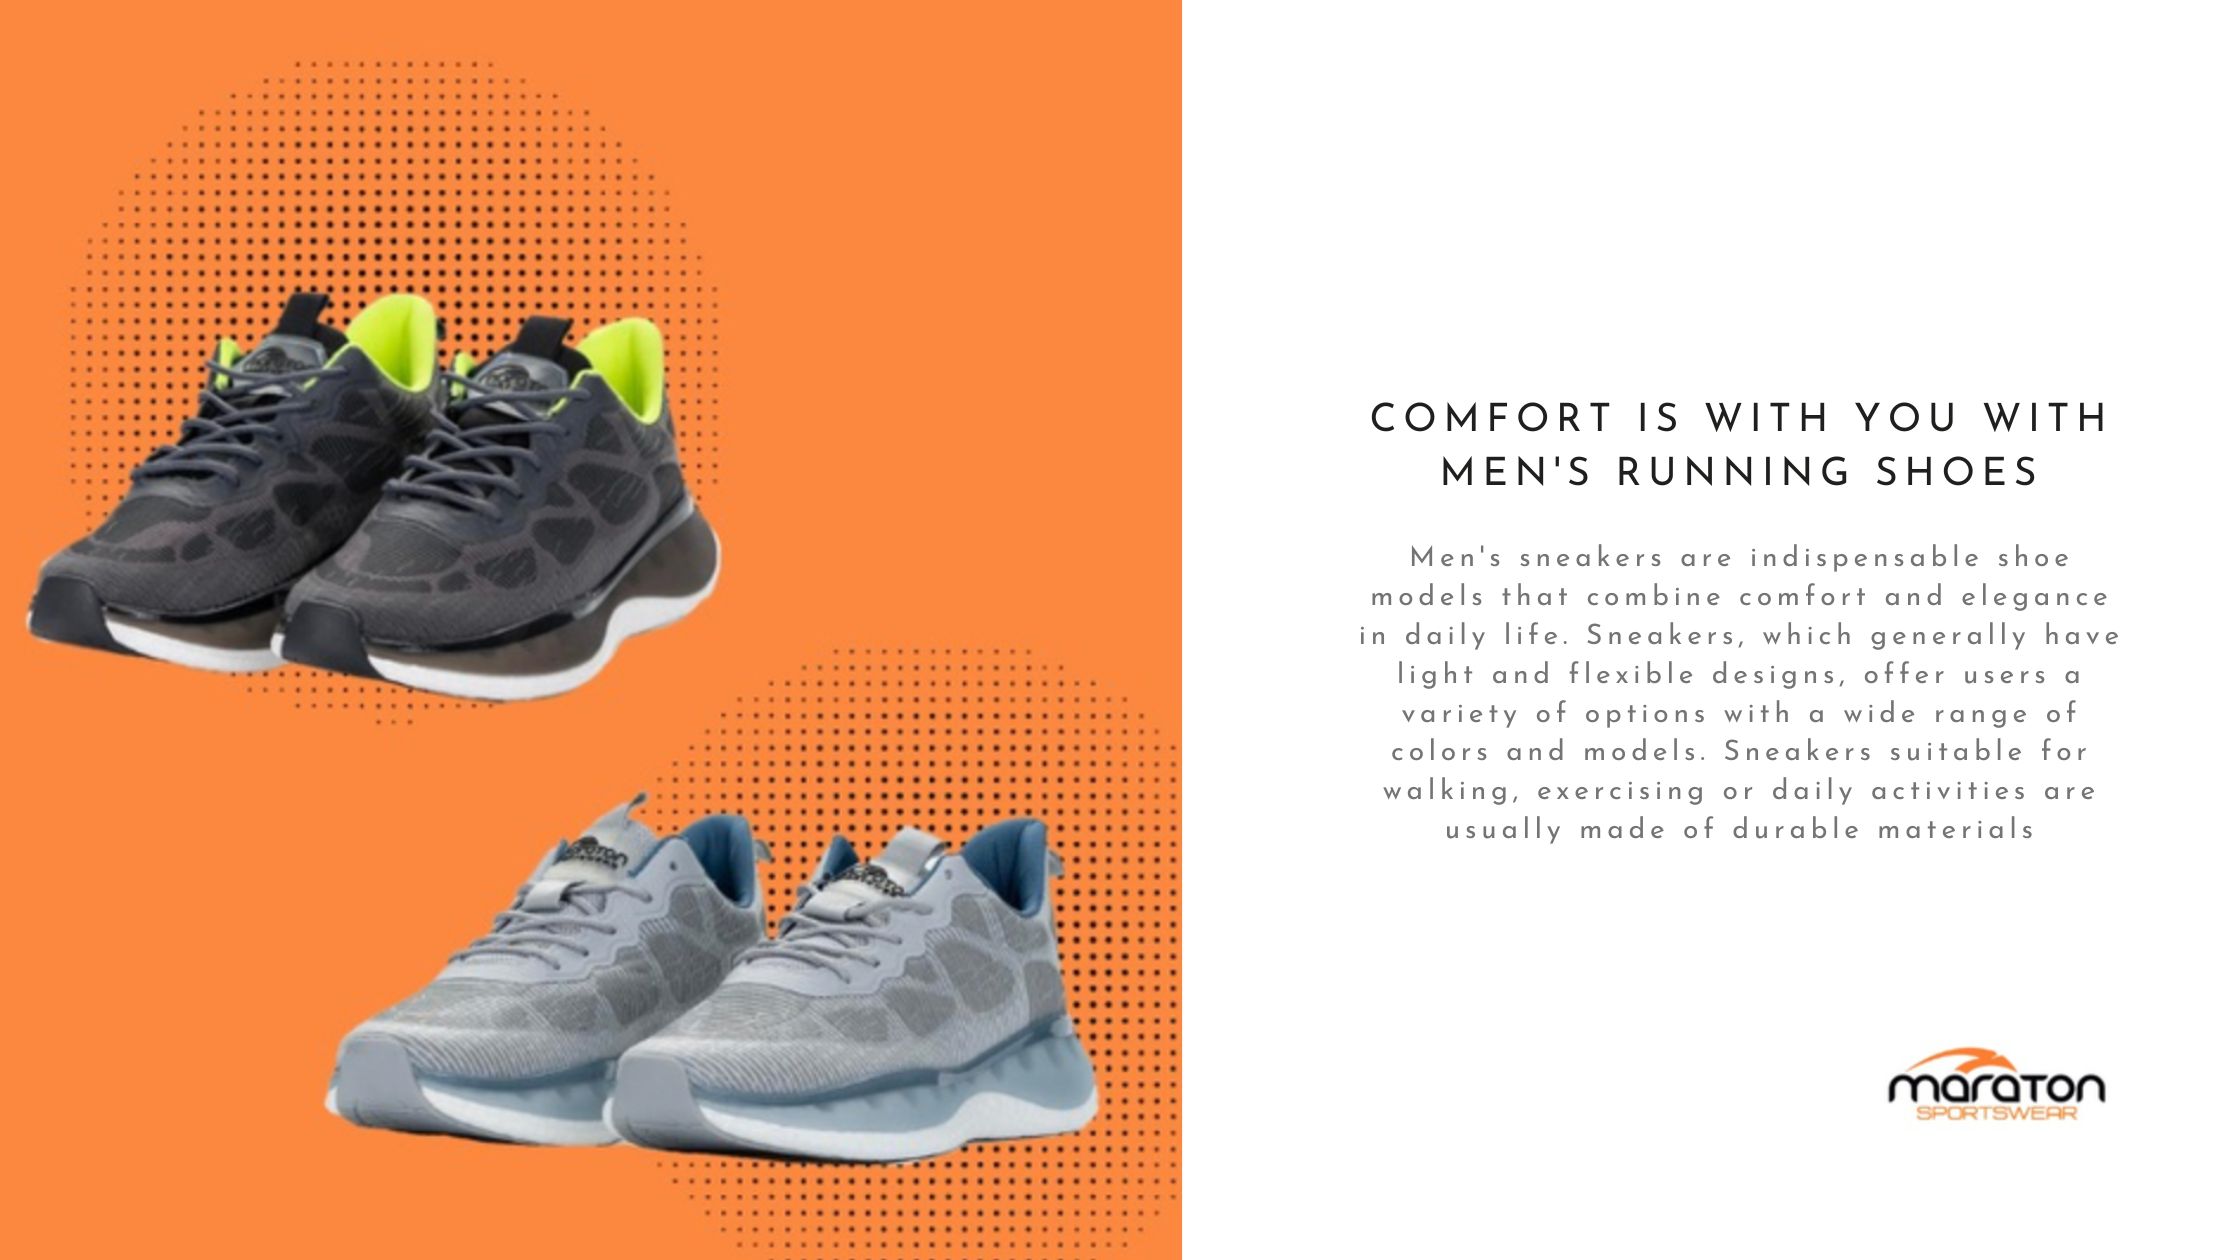 Comfort is with you with Men's Running Shoes